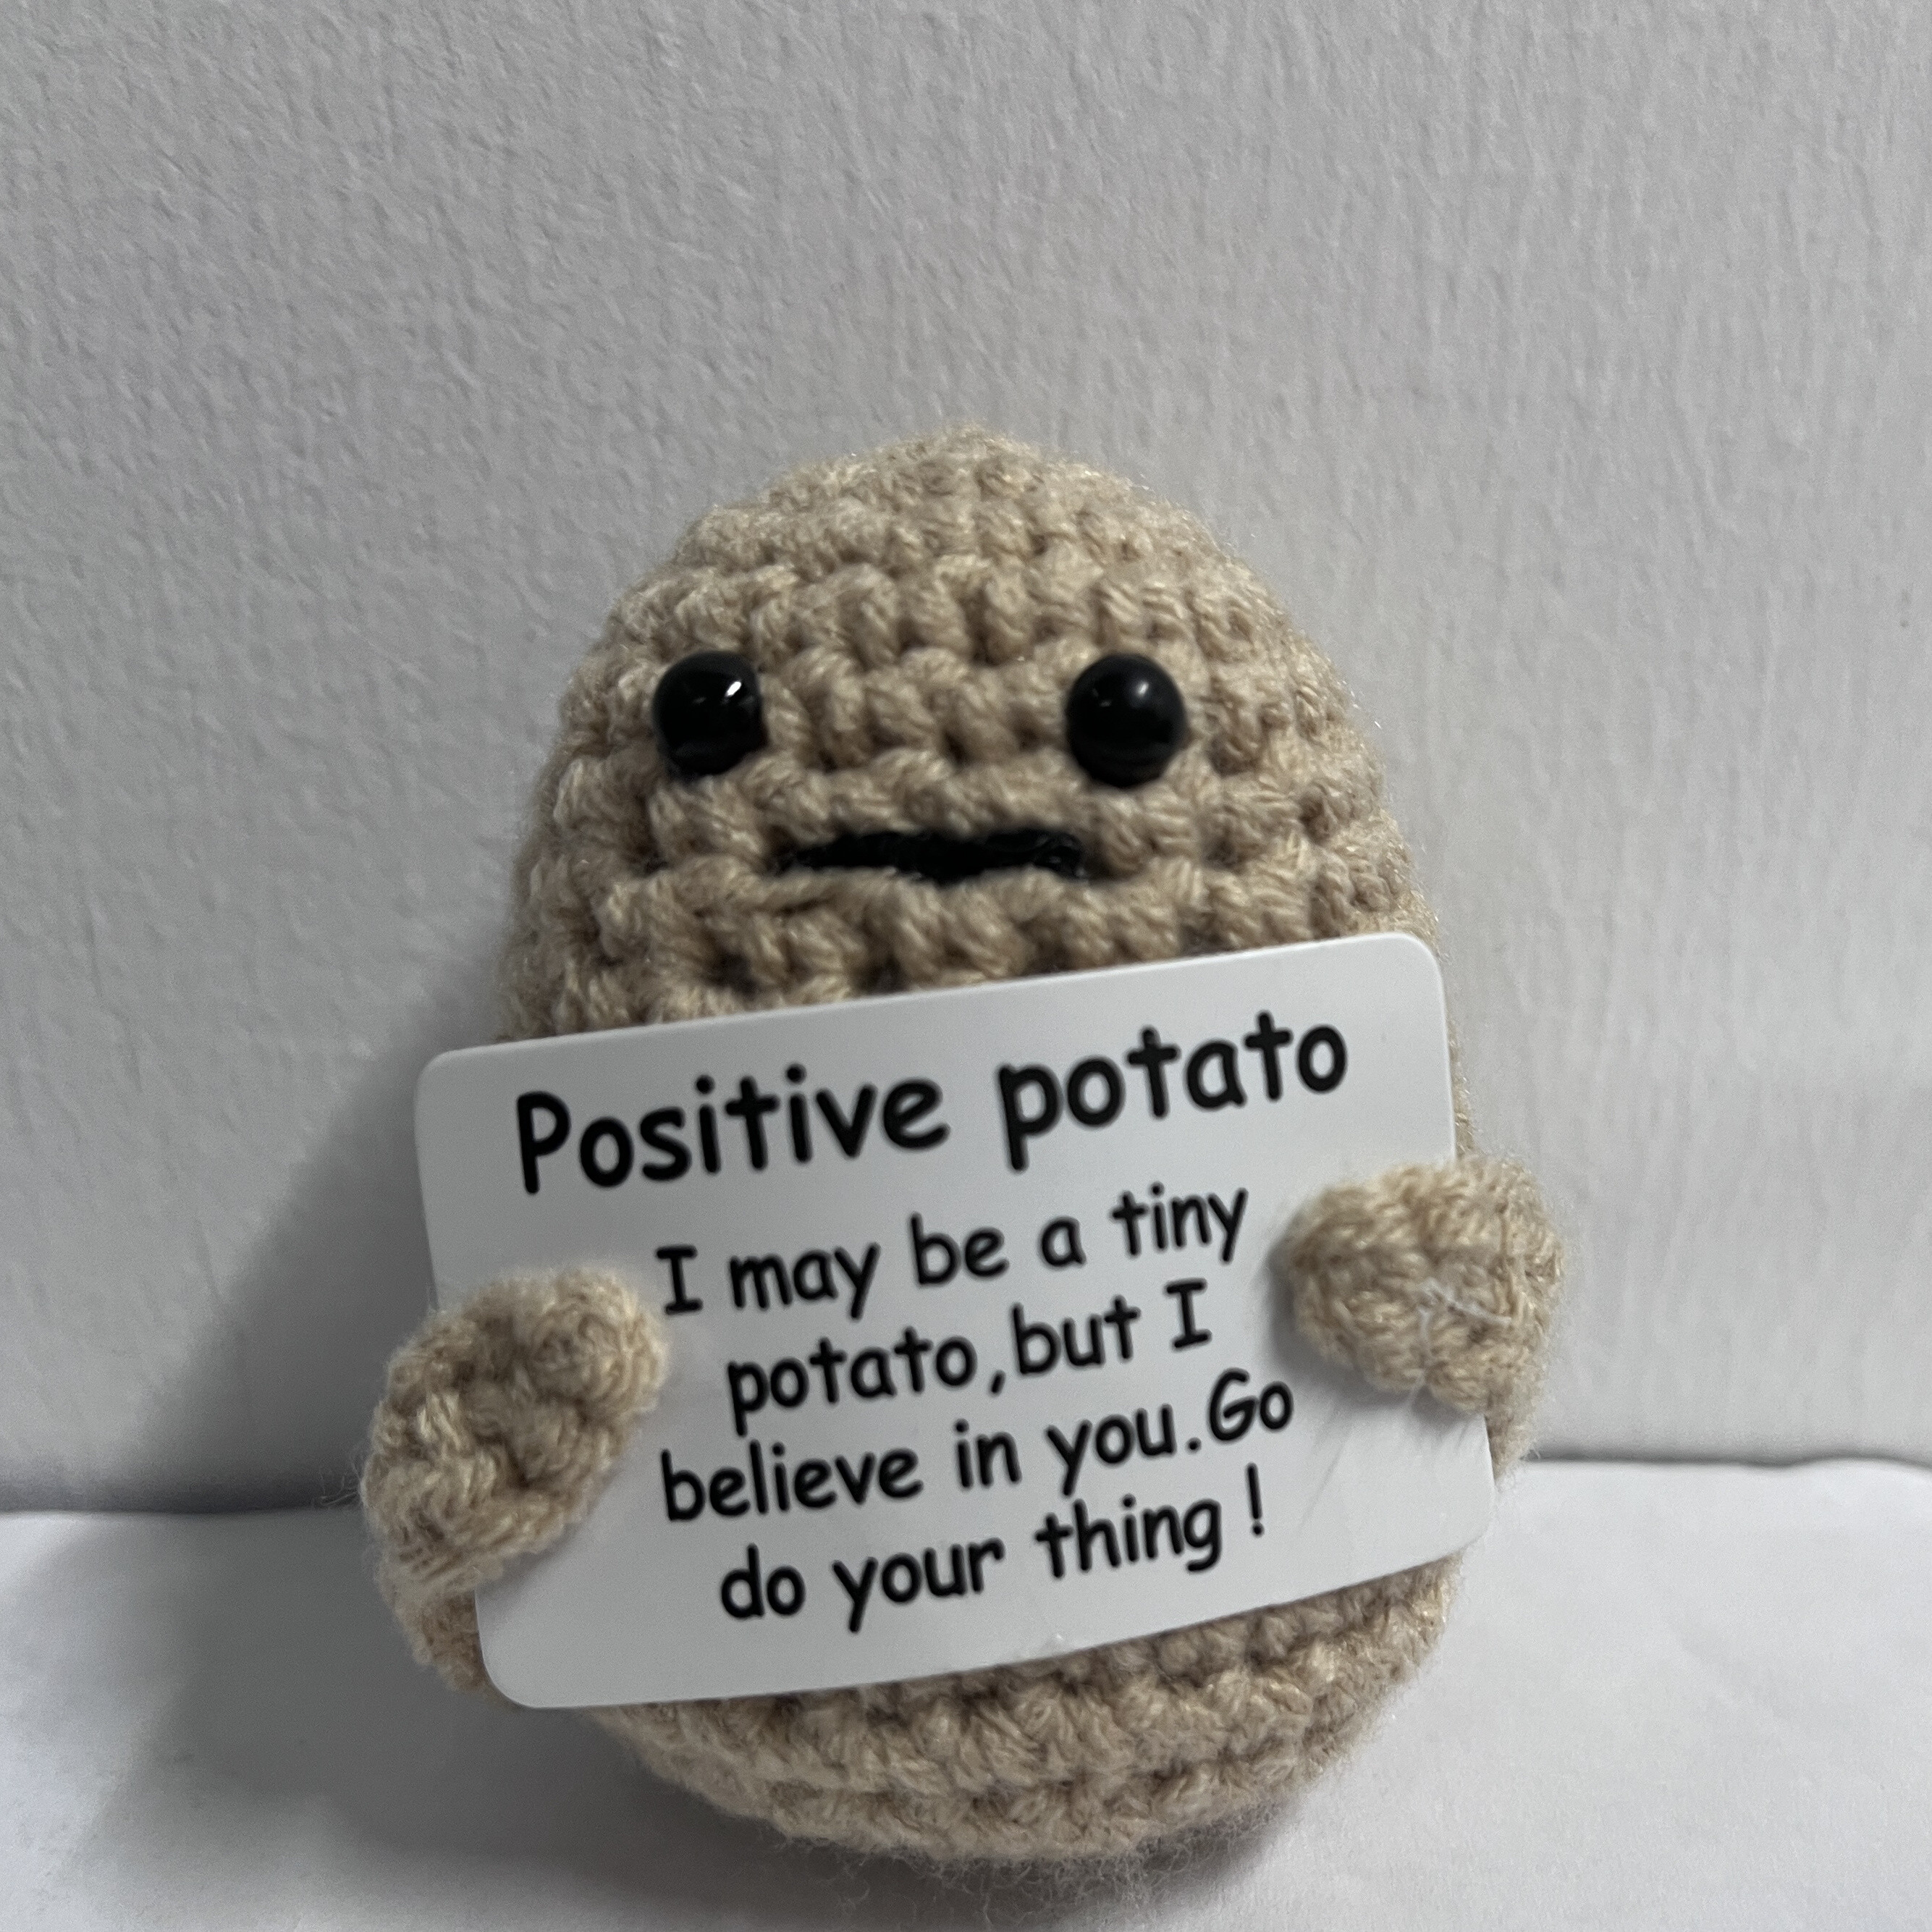 Positive Potato, Bulk Emotional Support Potato with Positive Cards and  Bags, Cute Crochet Doll Toy, Inspirational Gifts for Friends Birthday  Christmas